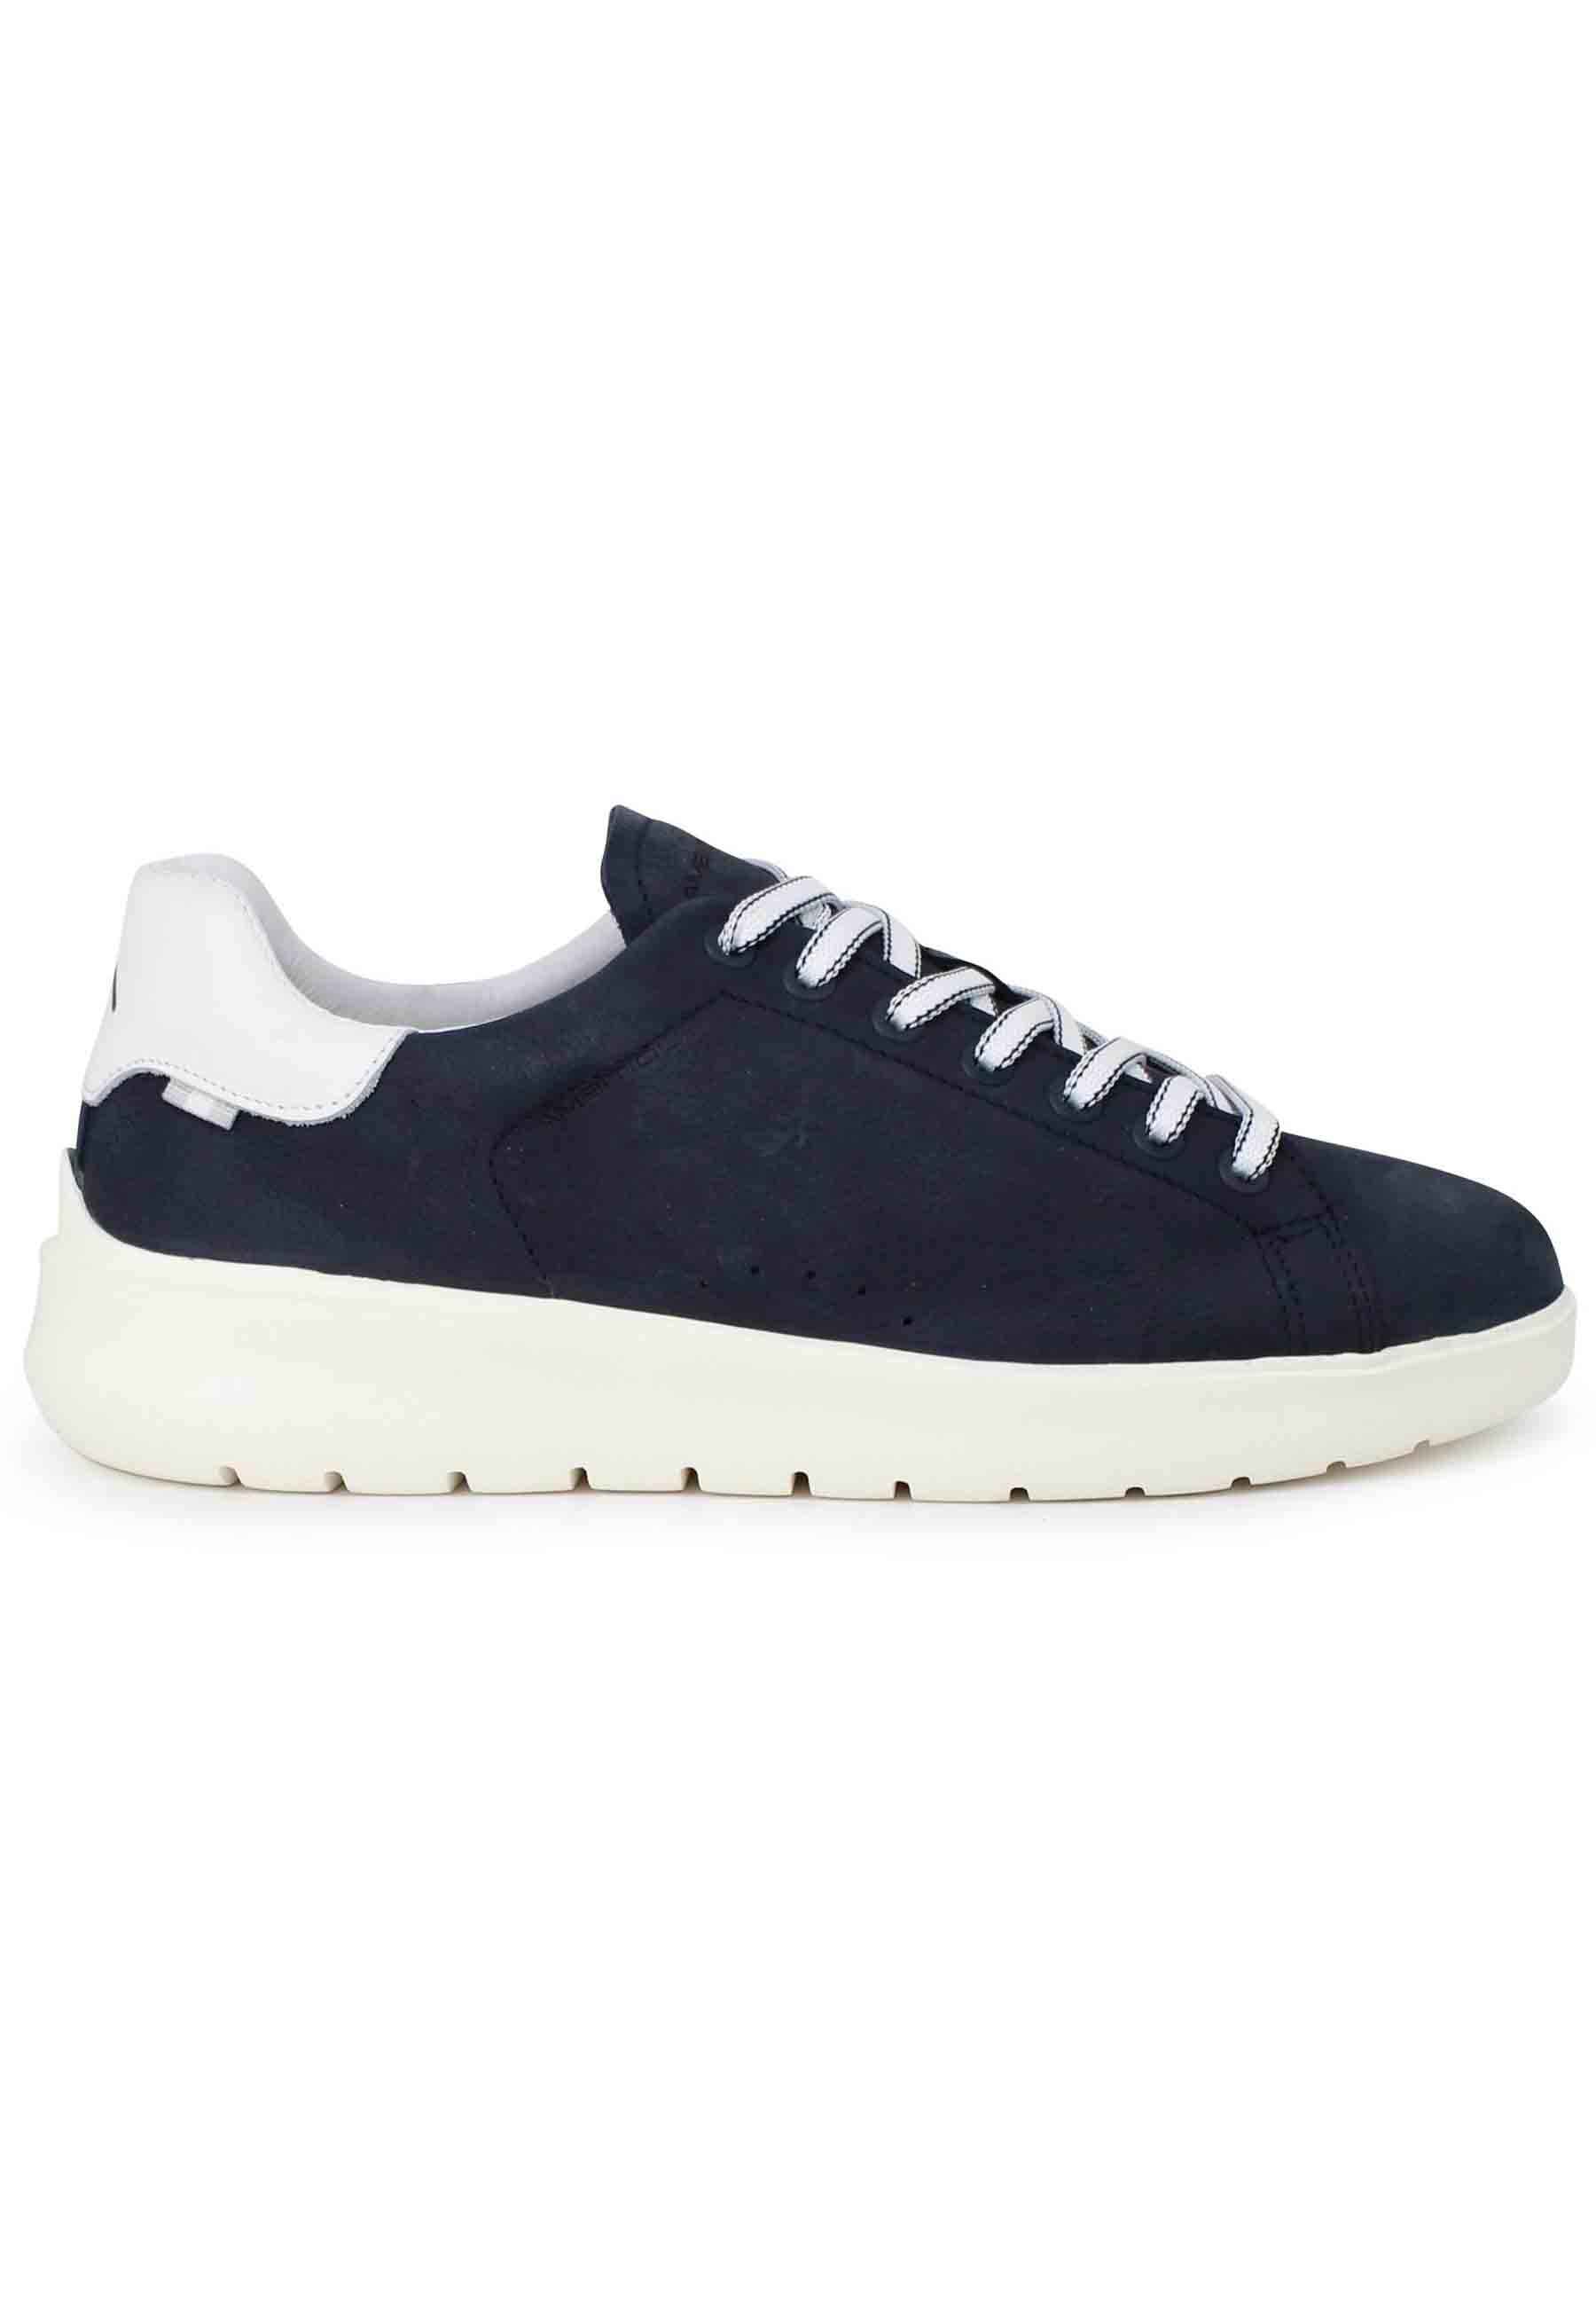 Hover men's sneakers in blue nubuck with high rubber sole